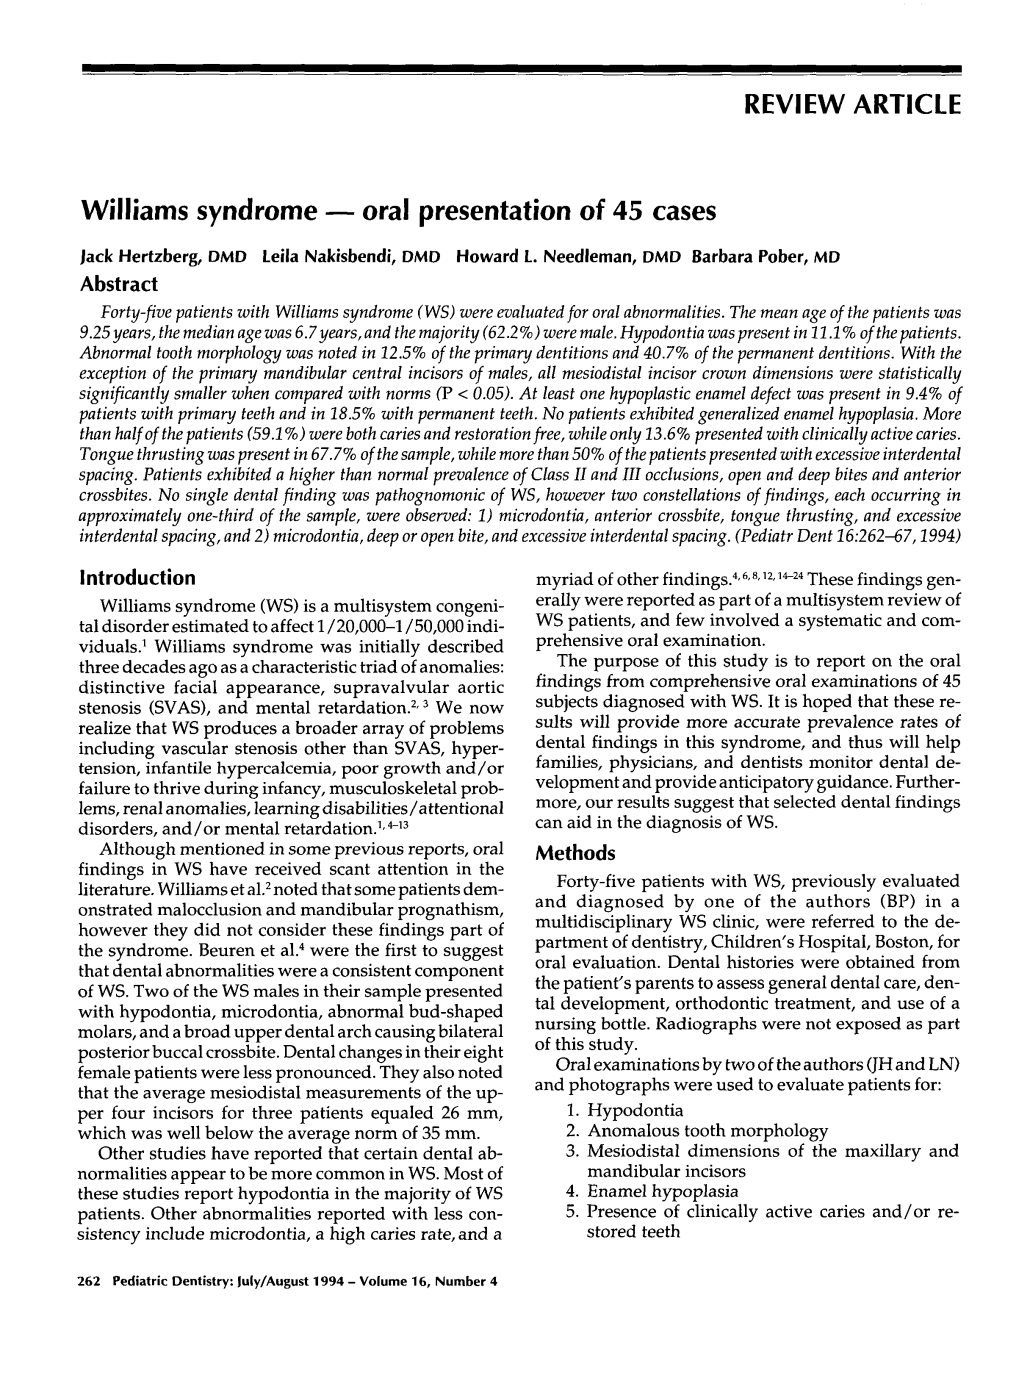 REVIEW ARTICLE Williams Syndrome M Oral Presentation of 45 Cases